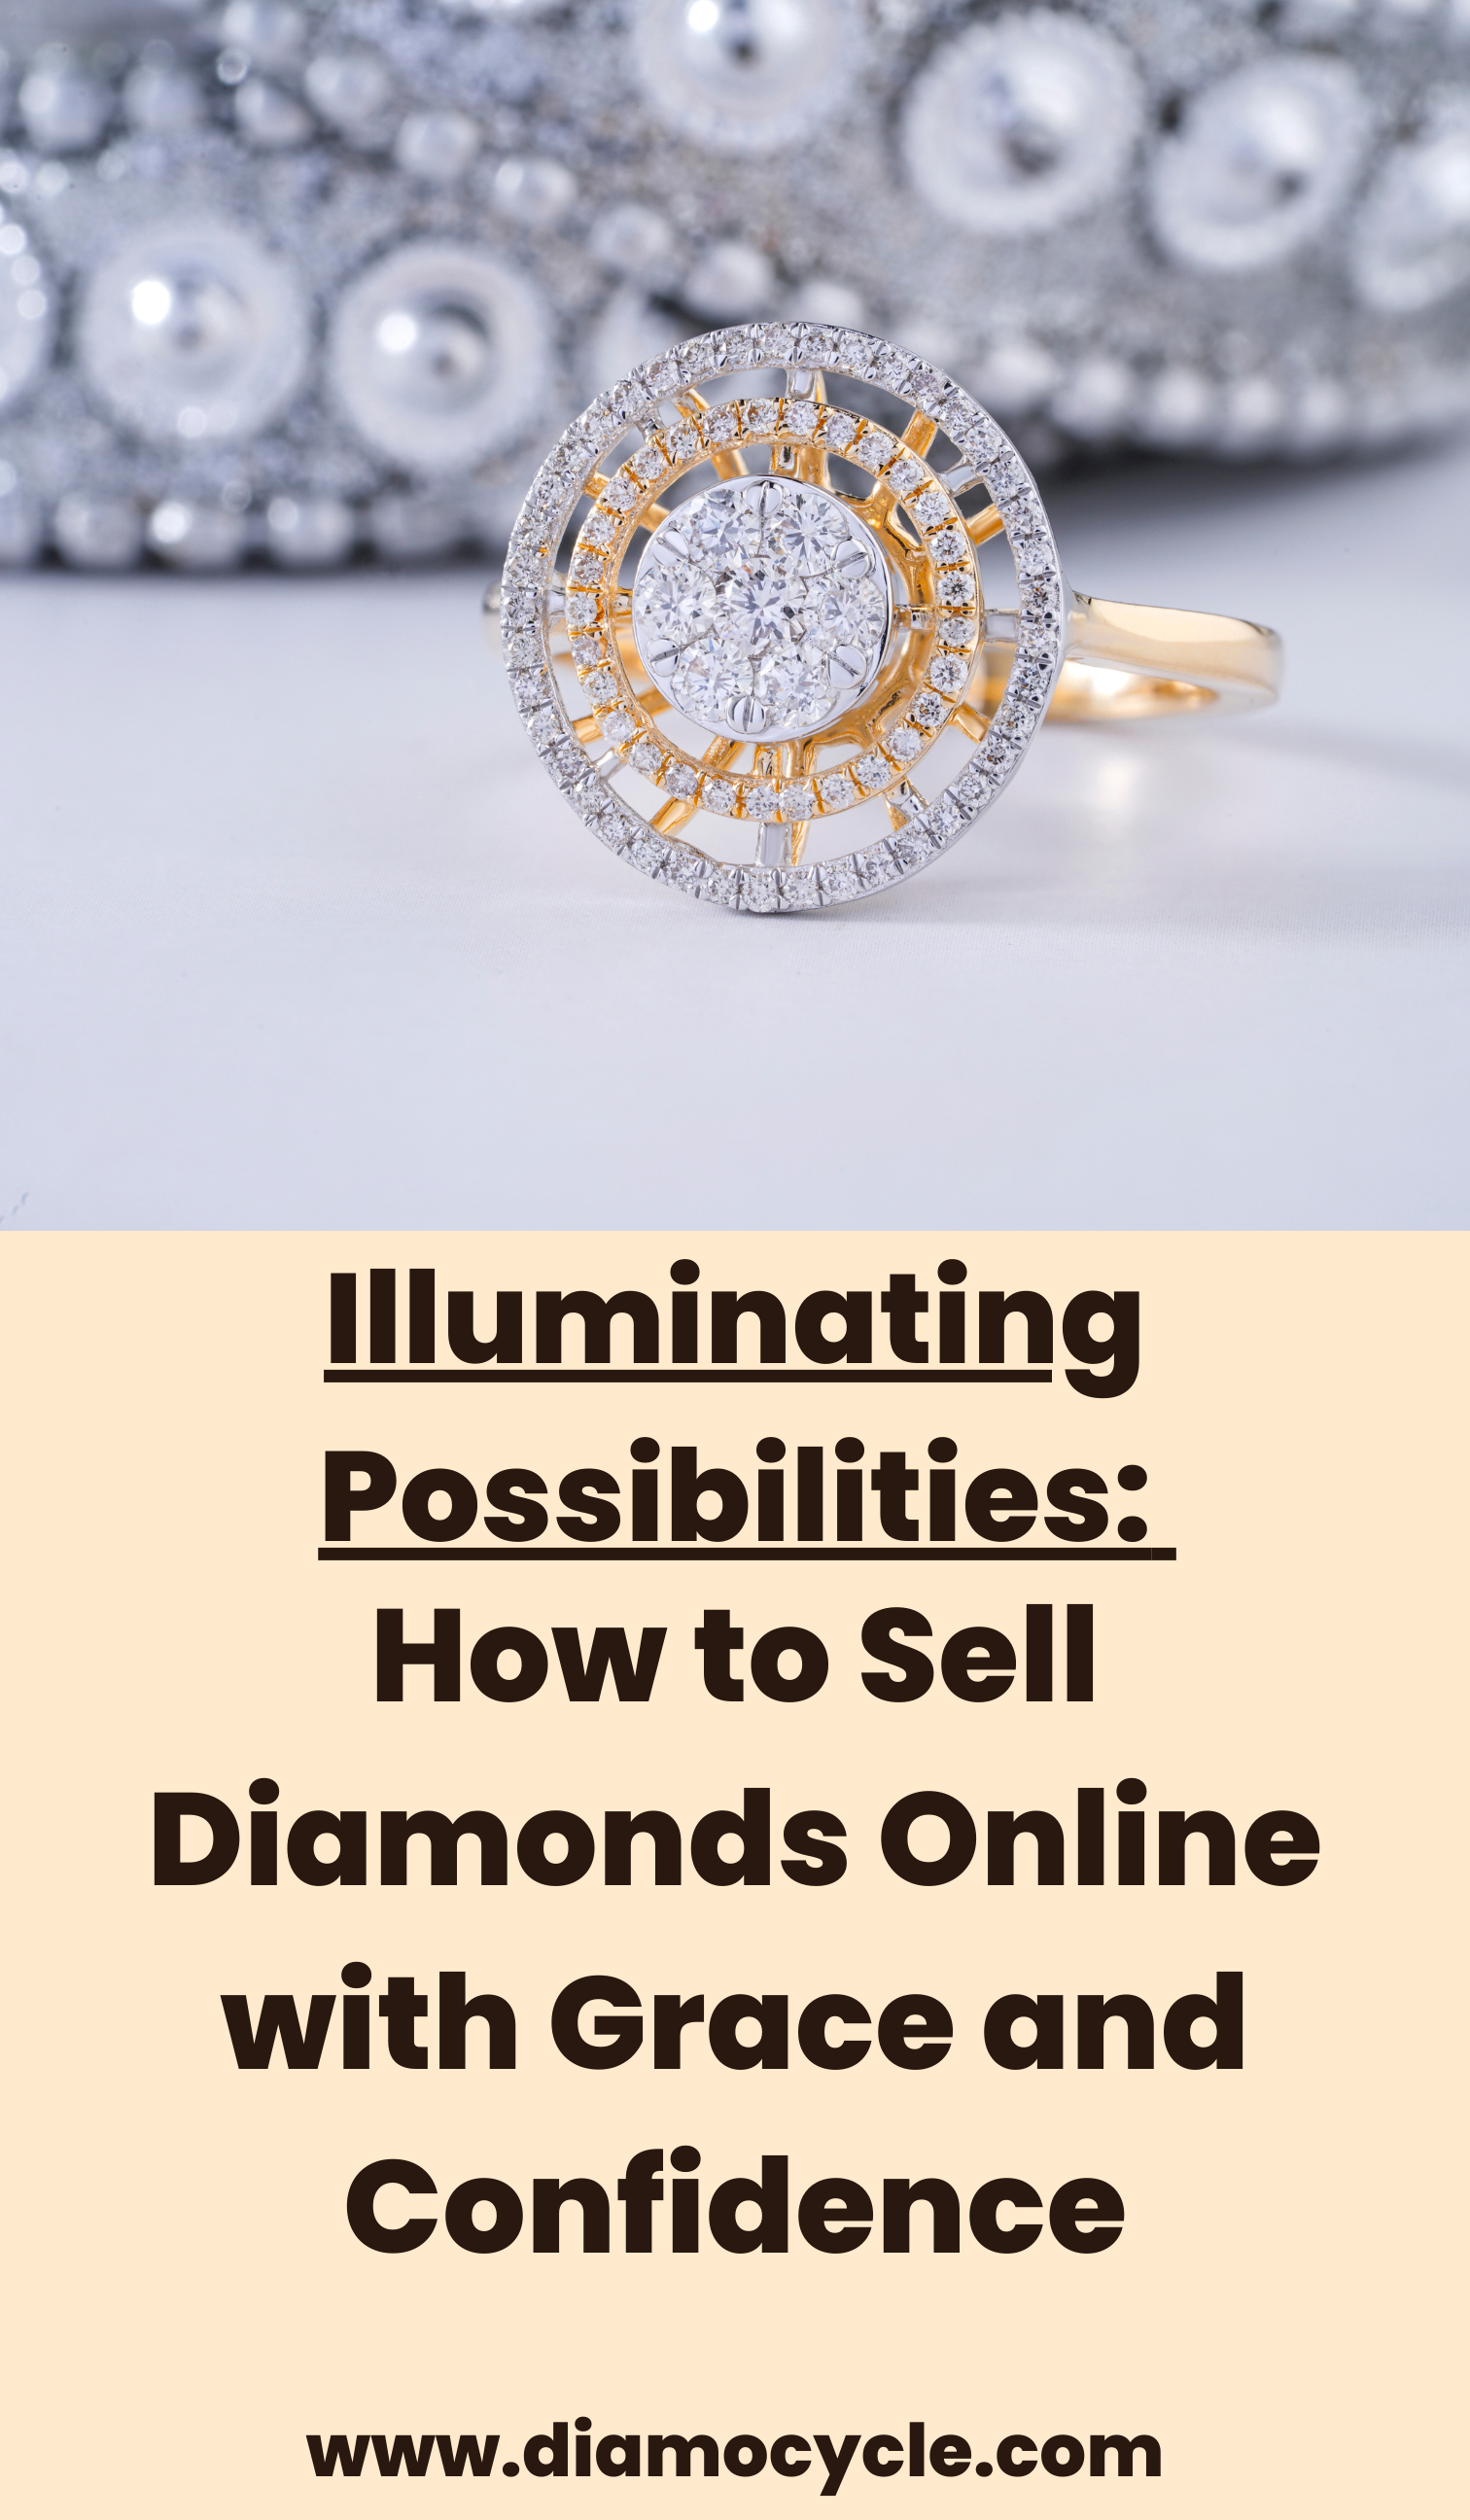 Illuminating Possibilities: How to Sell Diamonds Online with Grace and Confidence